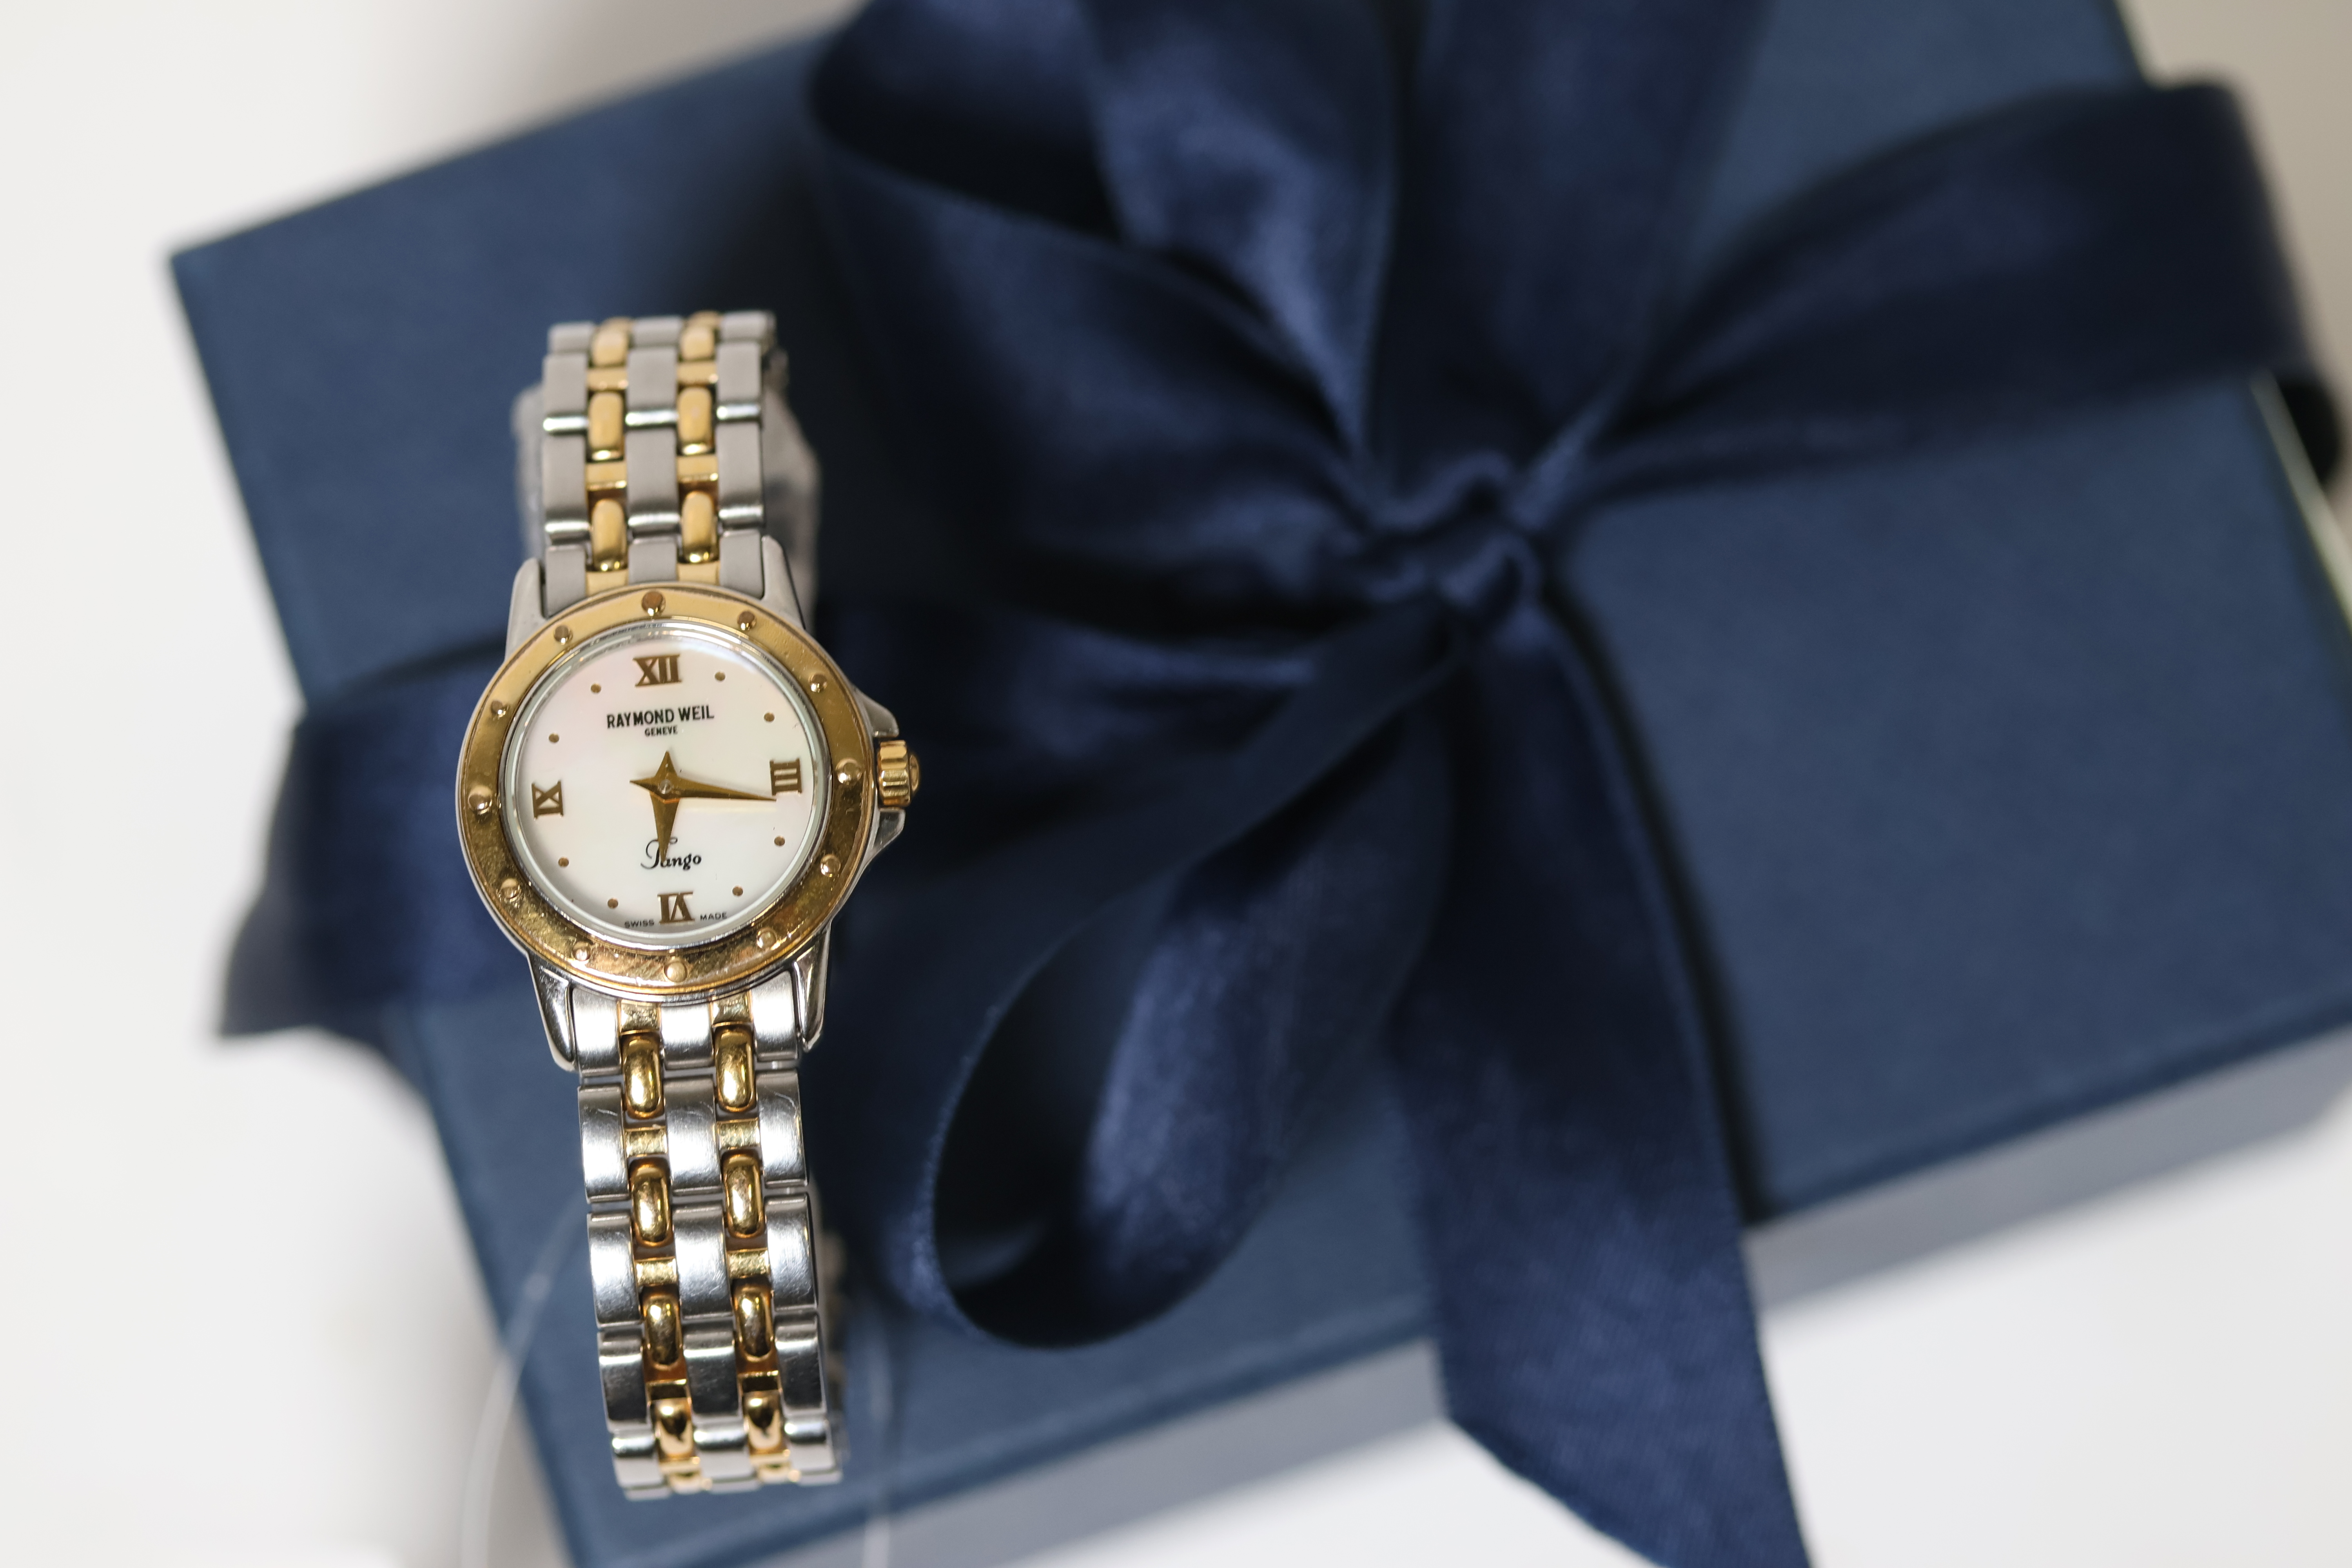 Brand: Ladies Raymond Weil Model Name: Tango Reference: 5860 Movement: Quartz Box: Yes Papers: Yes